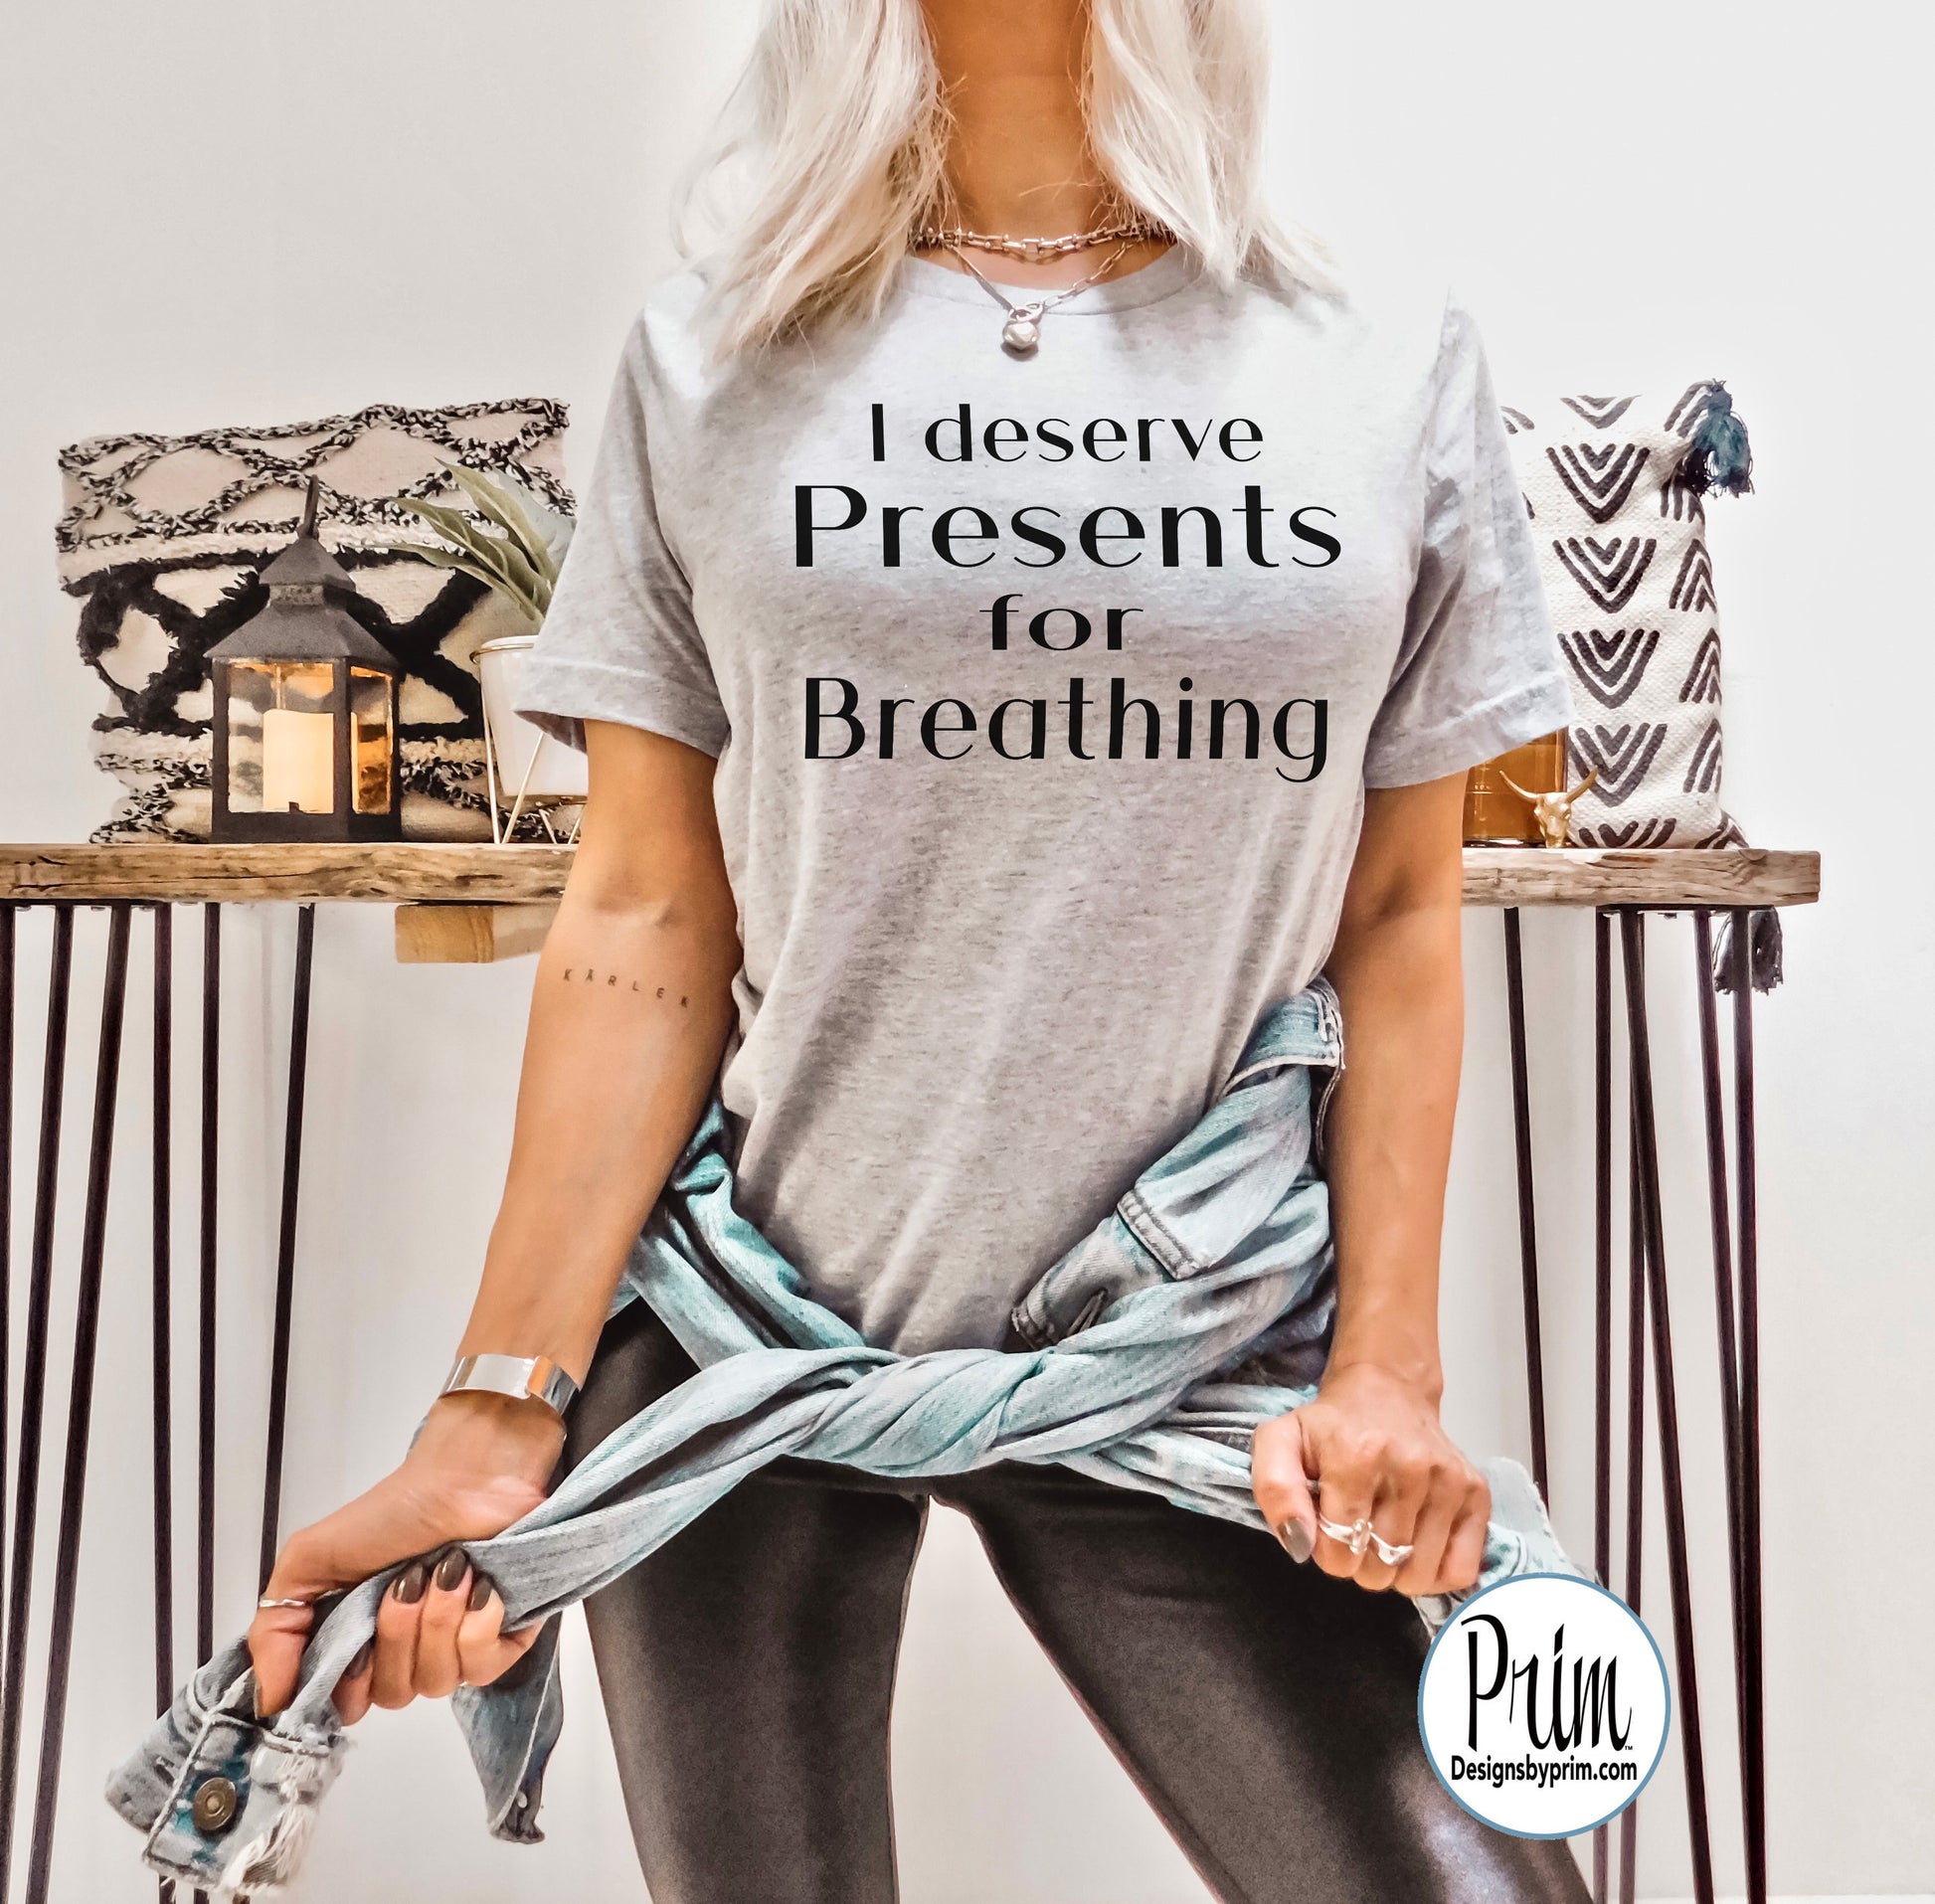 Lisa Barlow I Deserve Presents for Breathing Funny Soft Unisex T-Shirt | Bravo Fans RHOSLC Real Housewives of Salt Lake City Graphic Tee Top